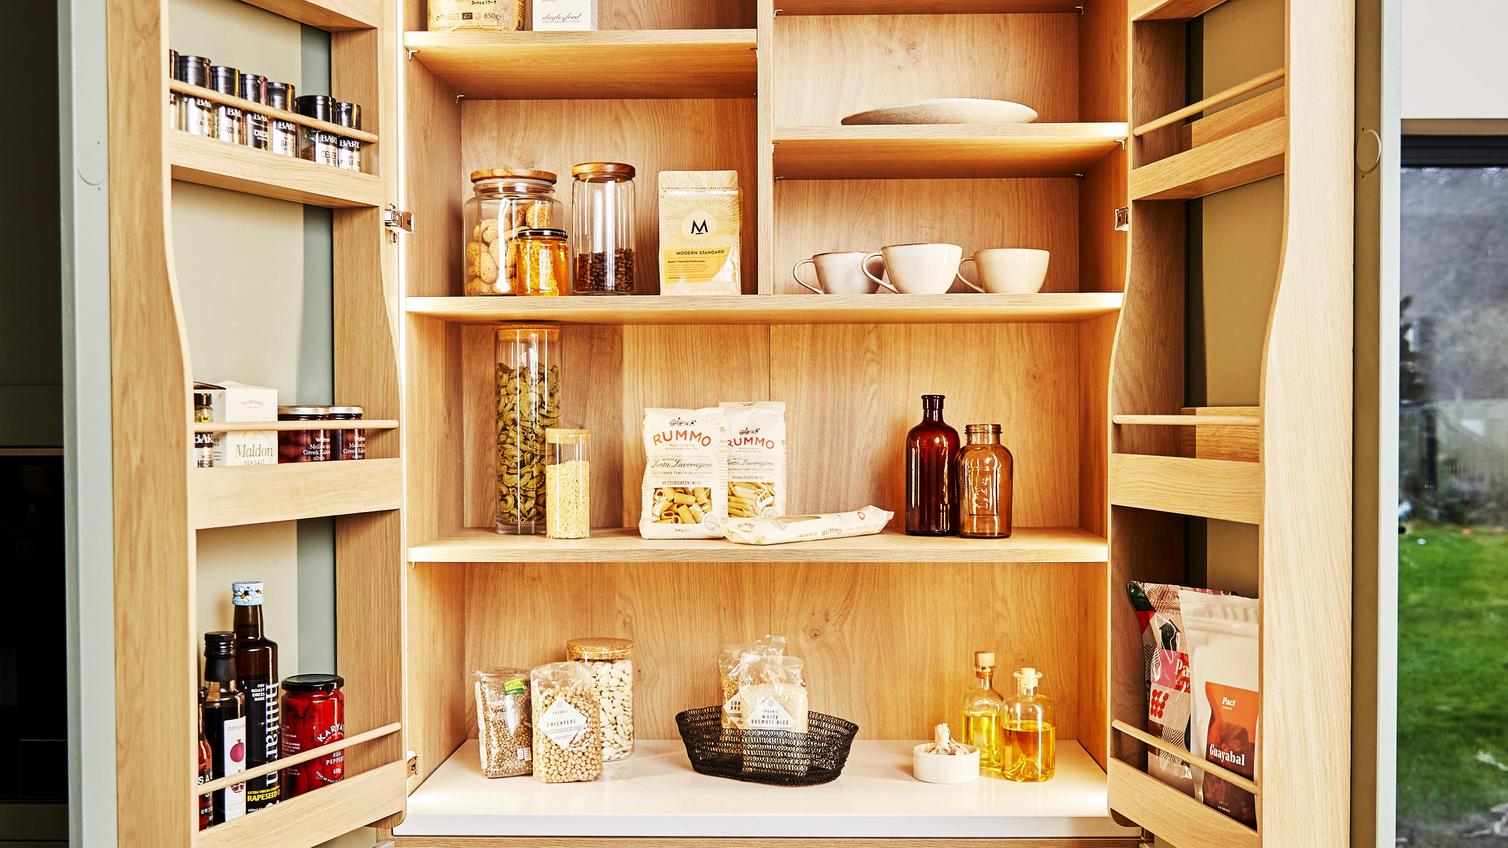 Open sage green shaker larder unit with light oak shelves and door balconies showing dried food and condiments.